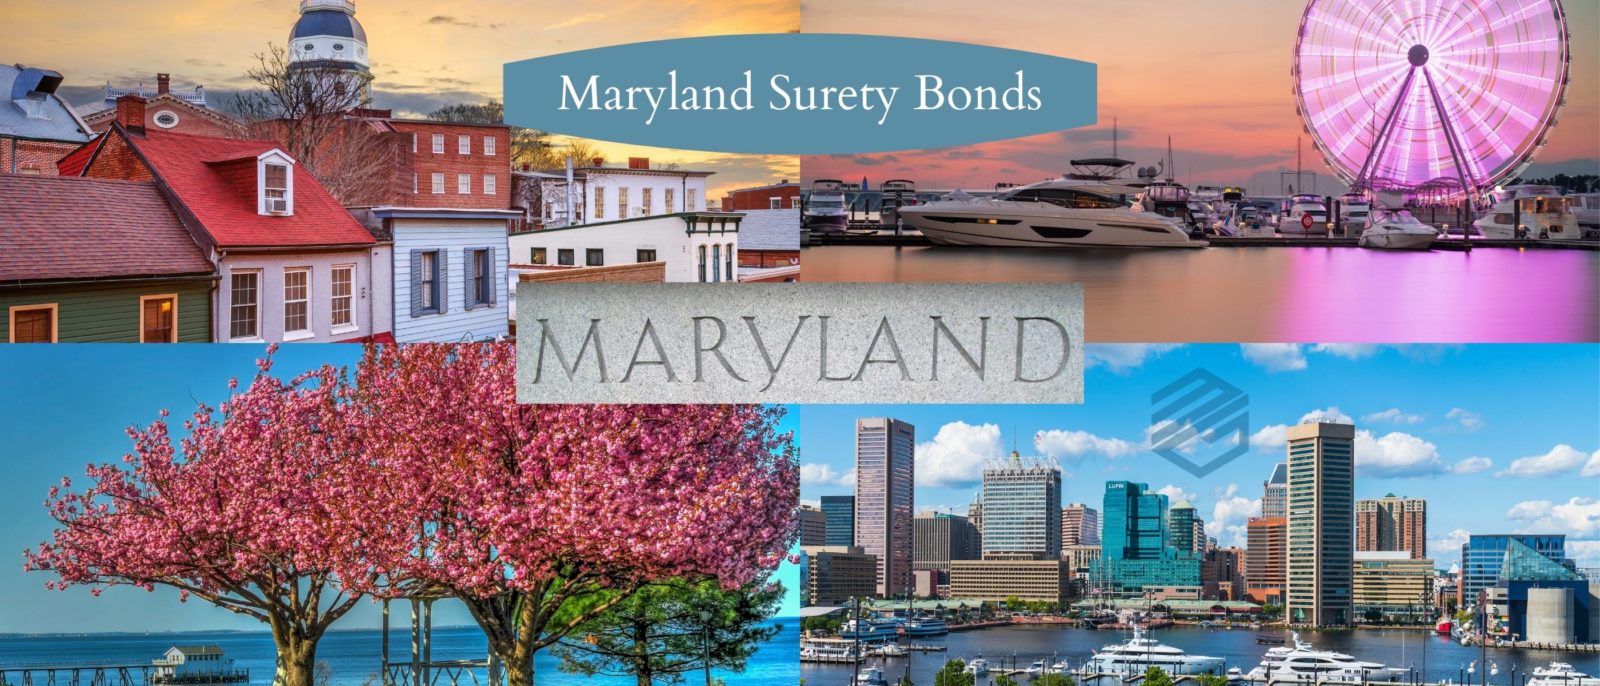 Maryland Surety Bonds - Maryland in stone in the middle with pictures of Annapolis, Baltimore and two other Maryland photos. Text box with "Maryland Surety Bonds" at the top